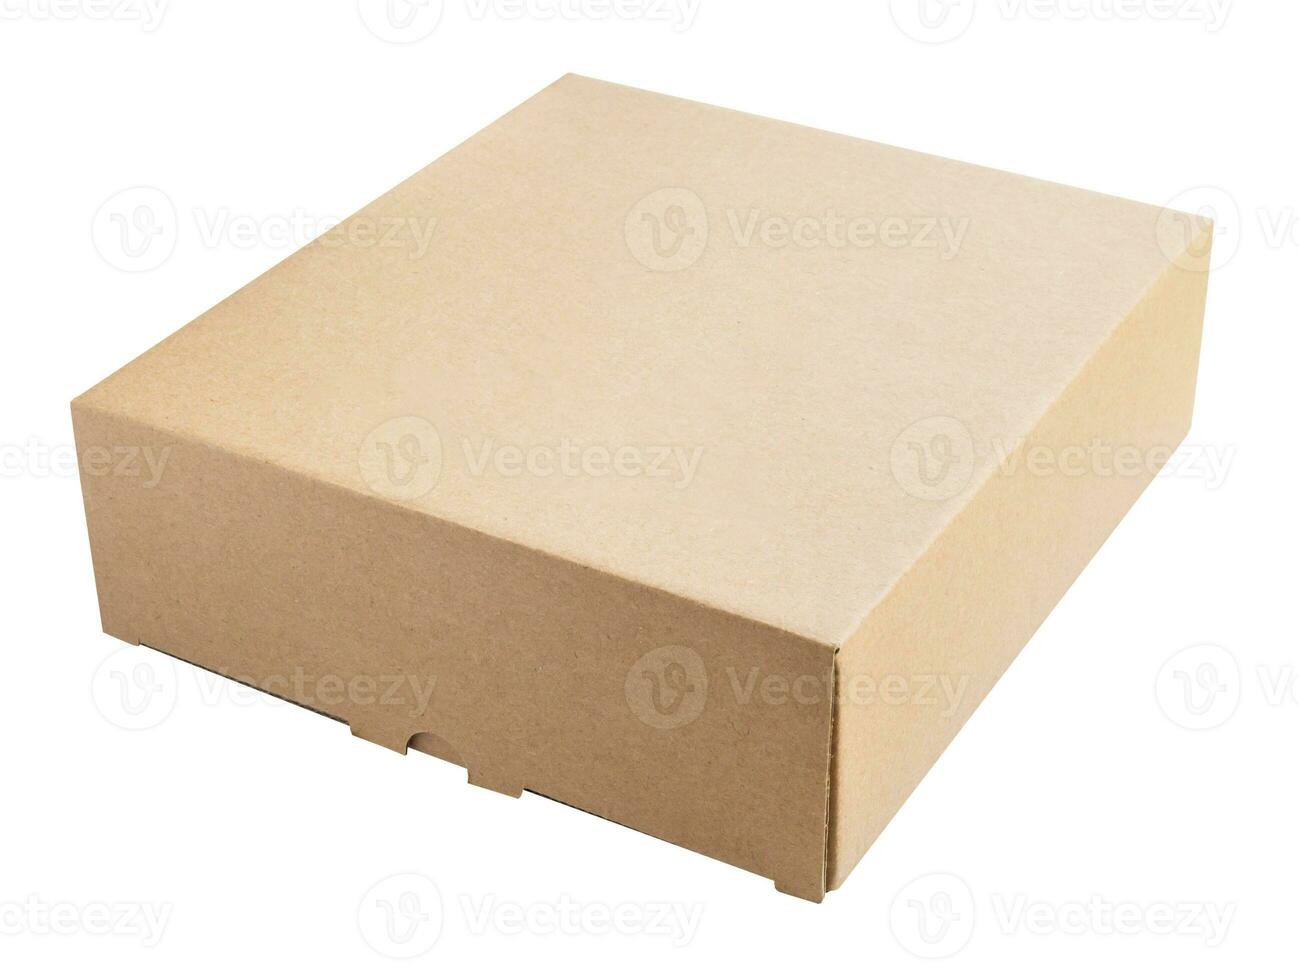 Mockup brown cardboard box isolated on white background photo